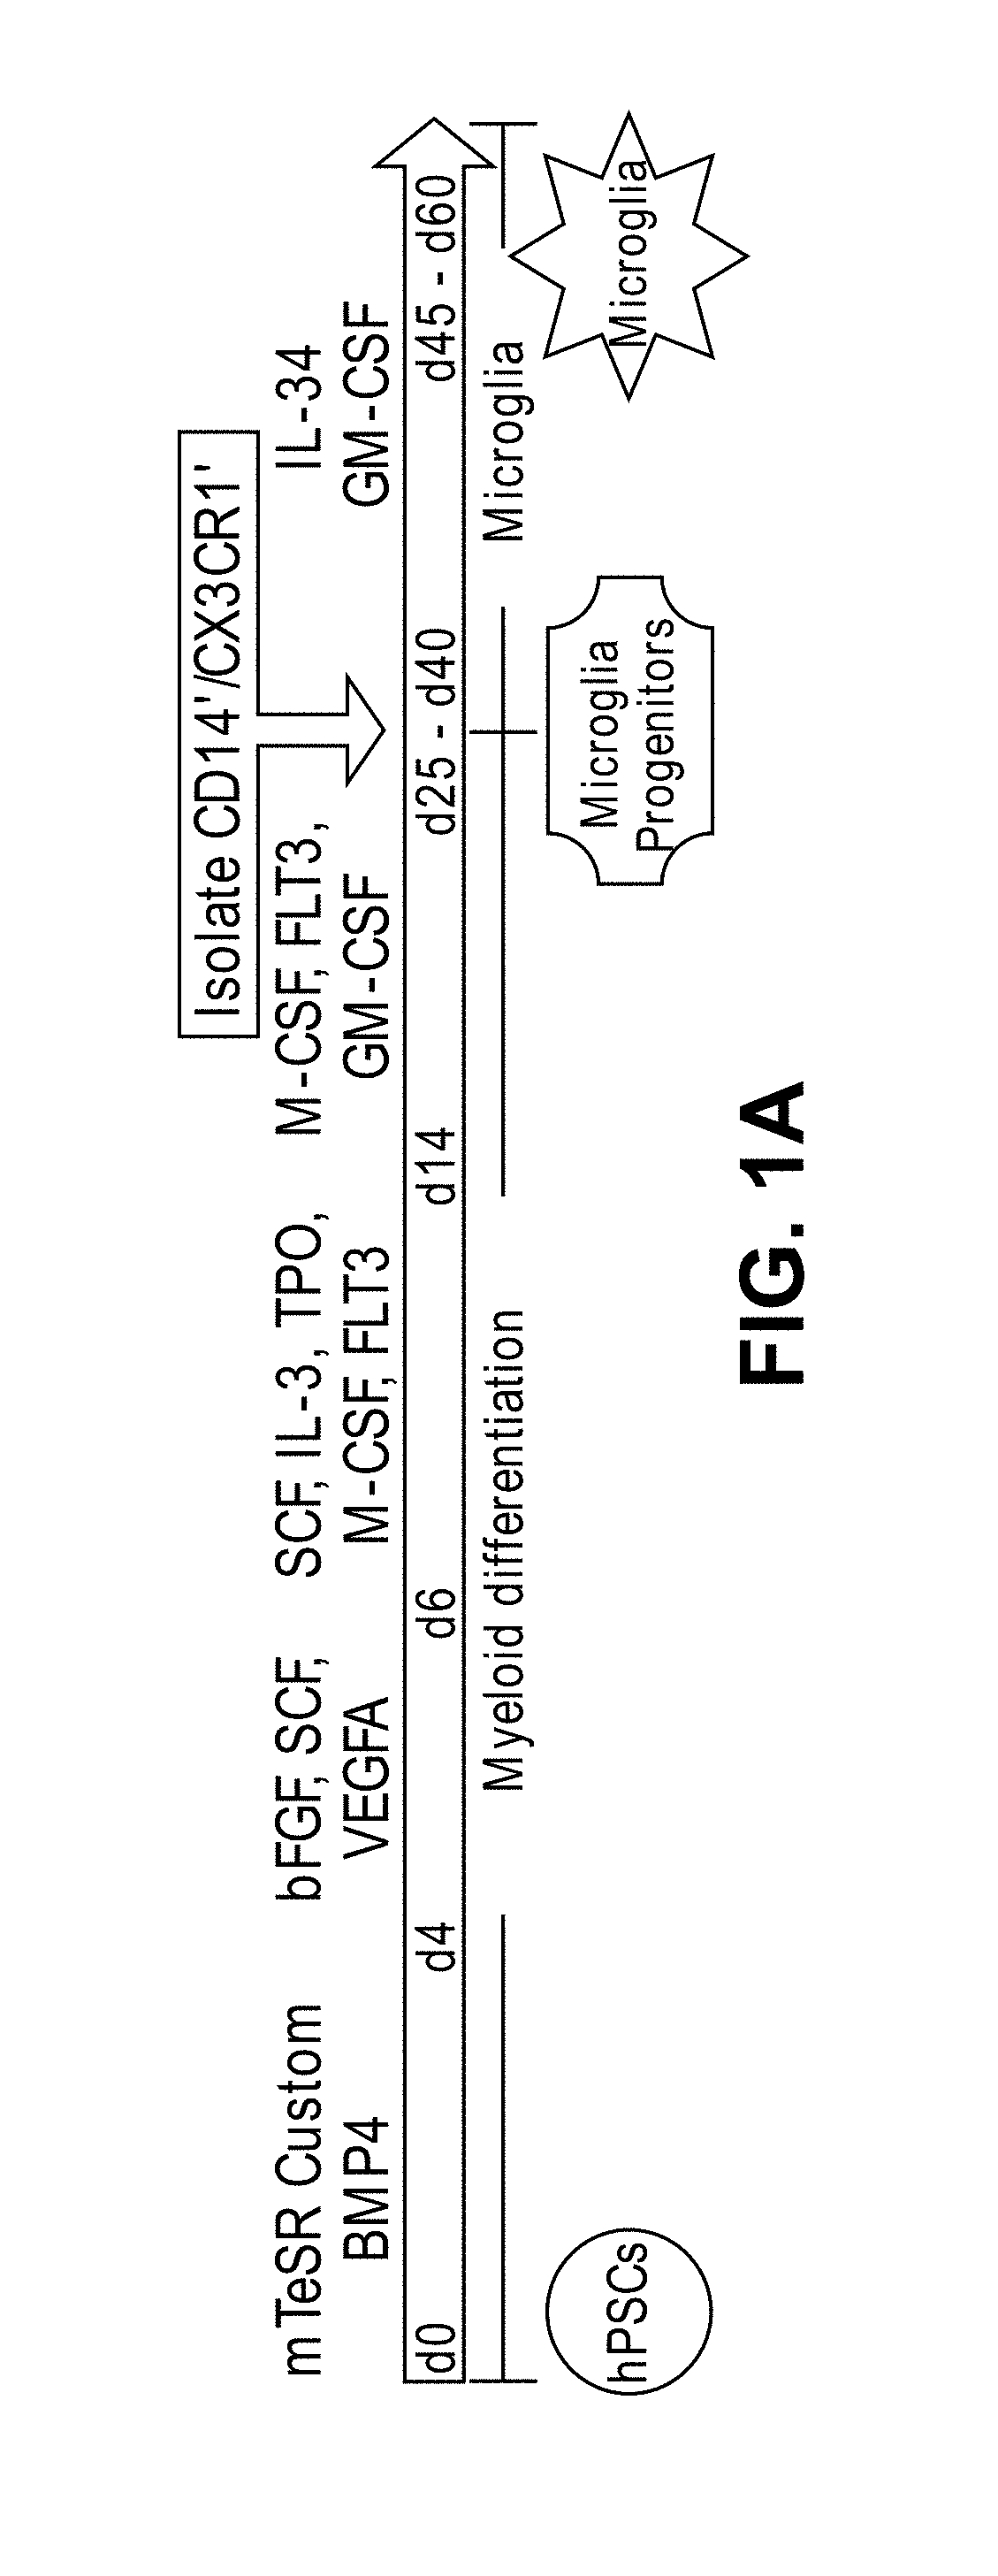 Microglia derived from pluripotent stem cells and methods of making and using the same